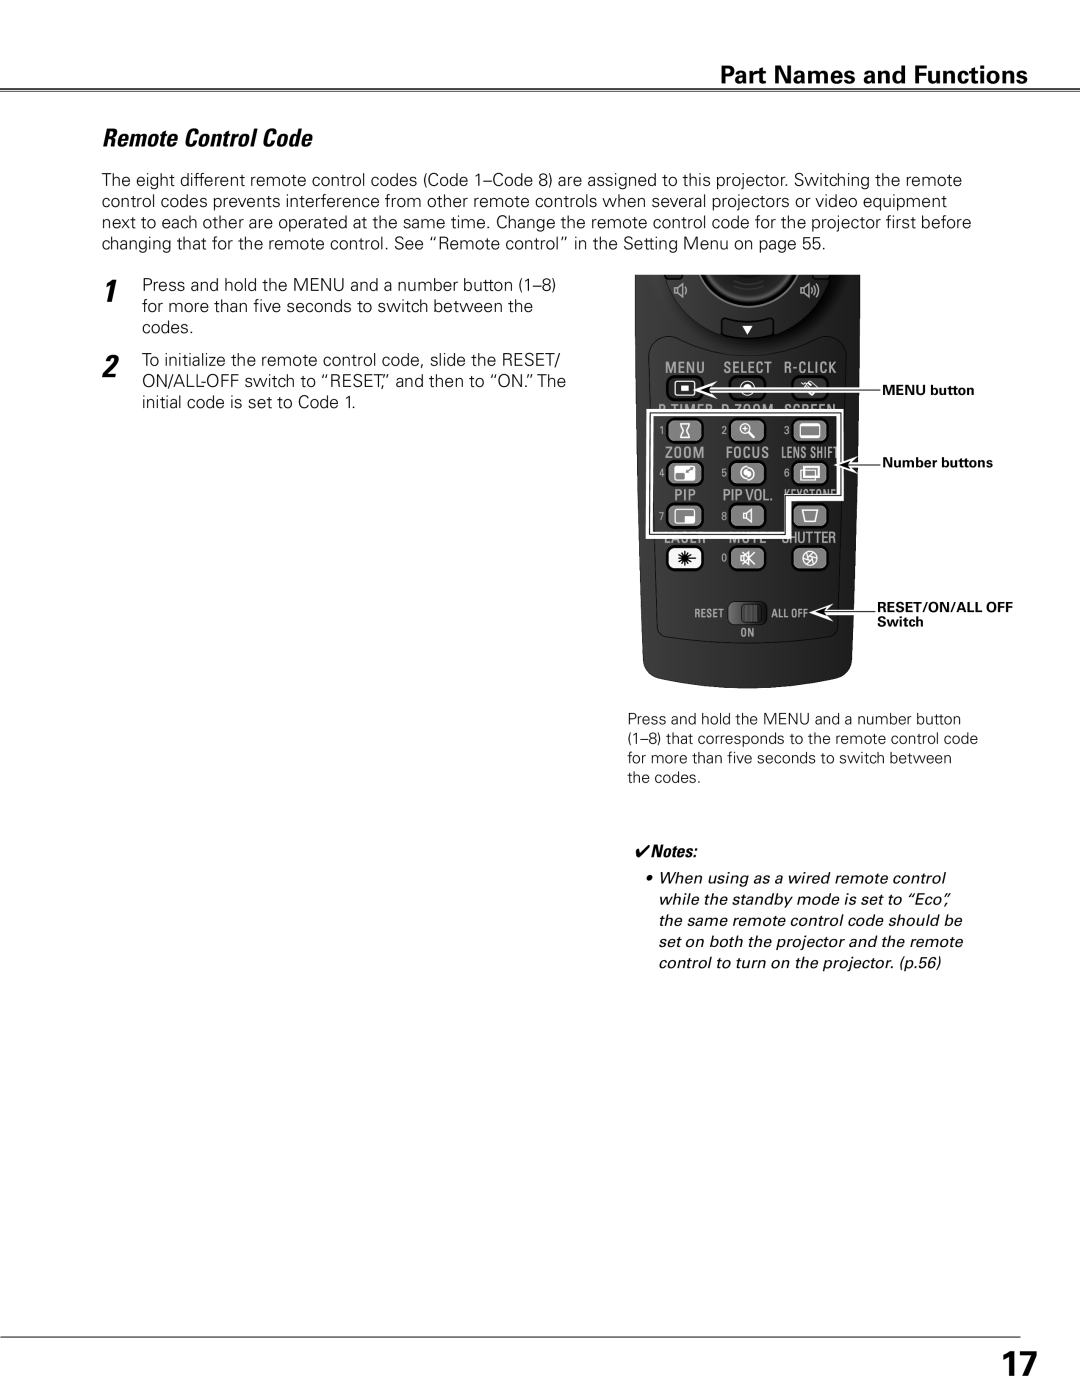 Sanyo WTC500L owner manual Remote Control Code, Part Names and Functions, Notes 